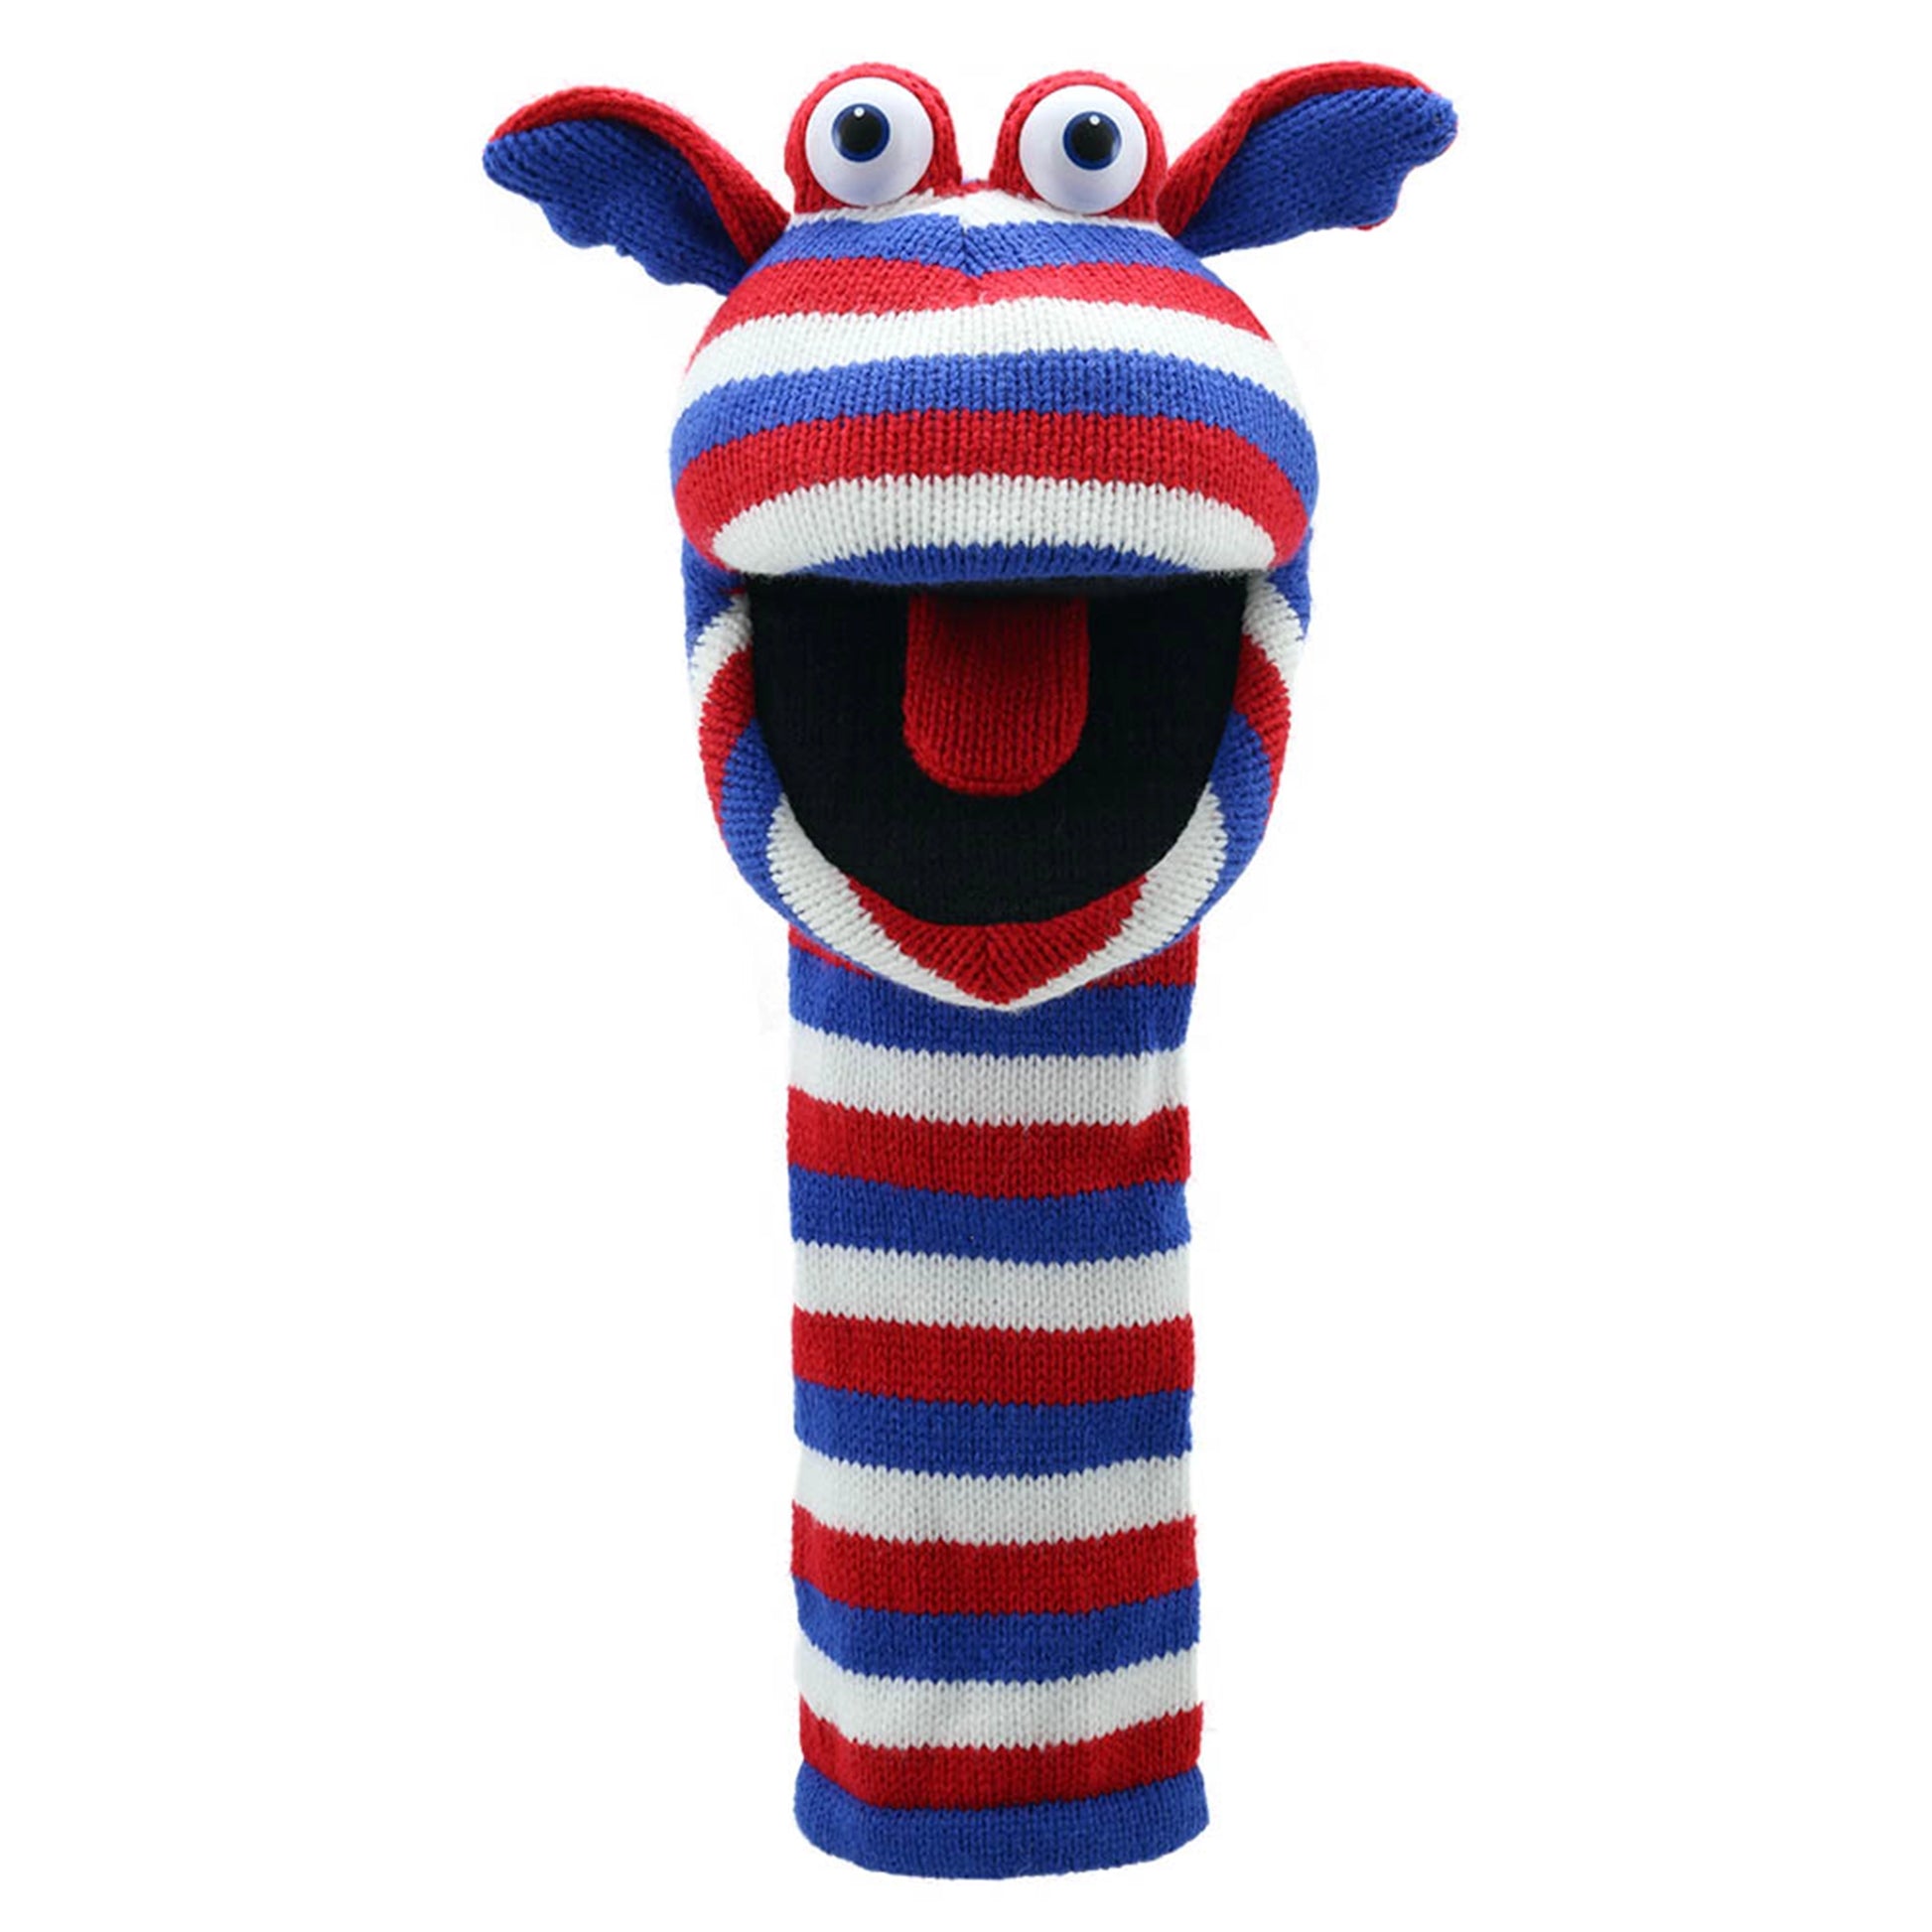 Sockette Hand Puppet - Jack - The Puppet Company - The Forgotten Toy Shop